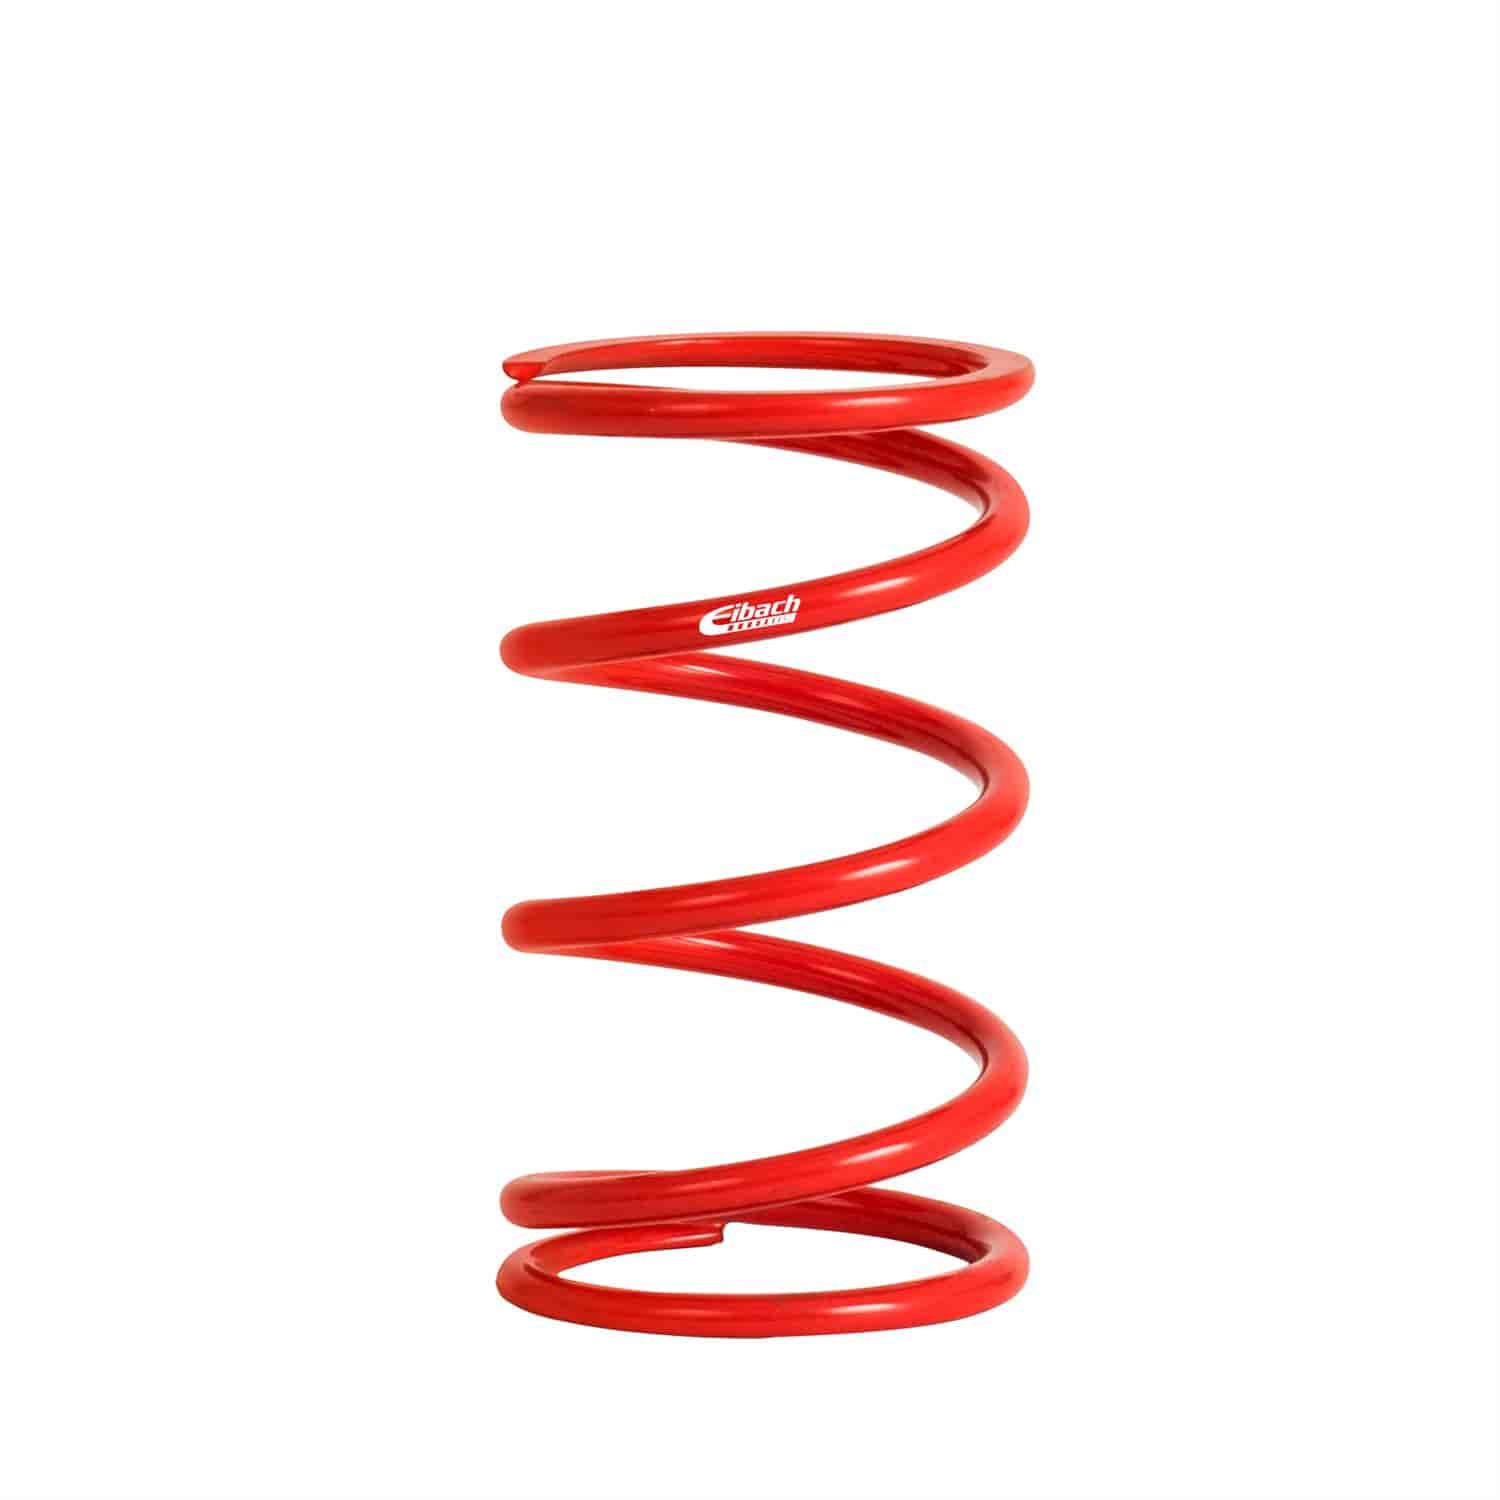 1050.550.0375 EIBACH CONVENTIONAL FRONT SPRING